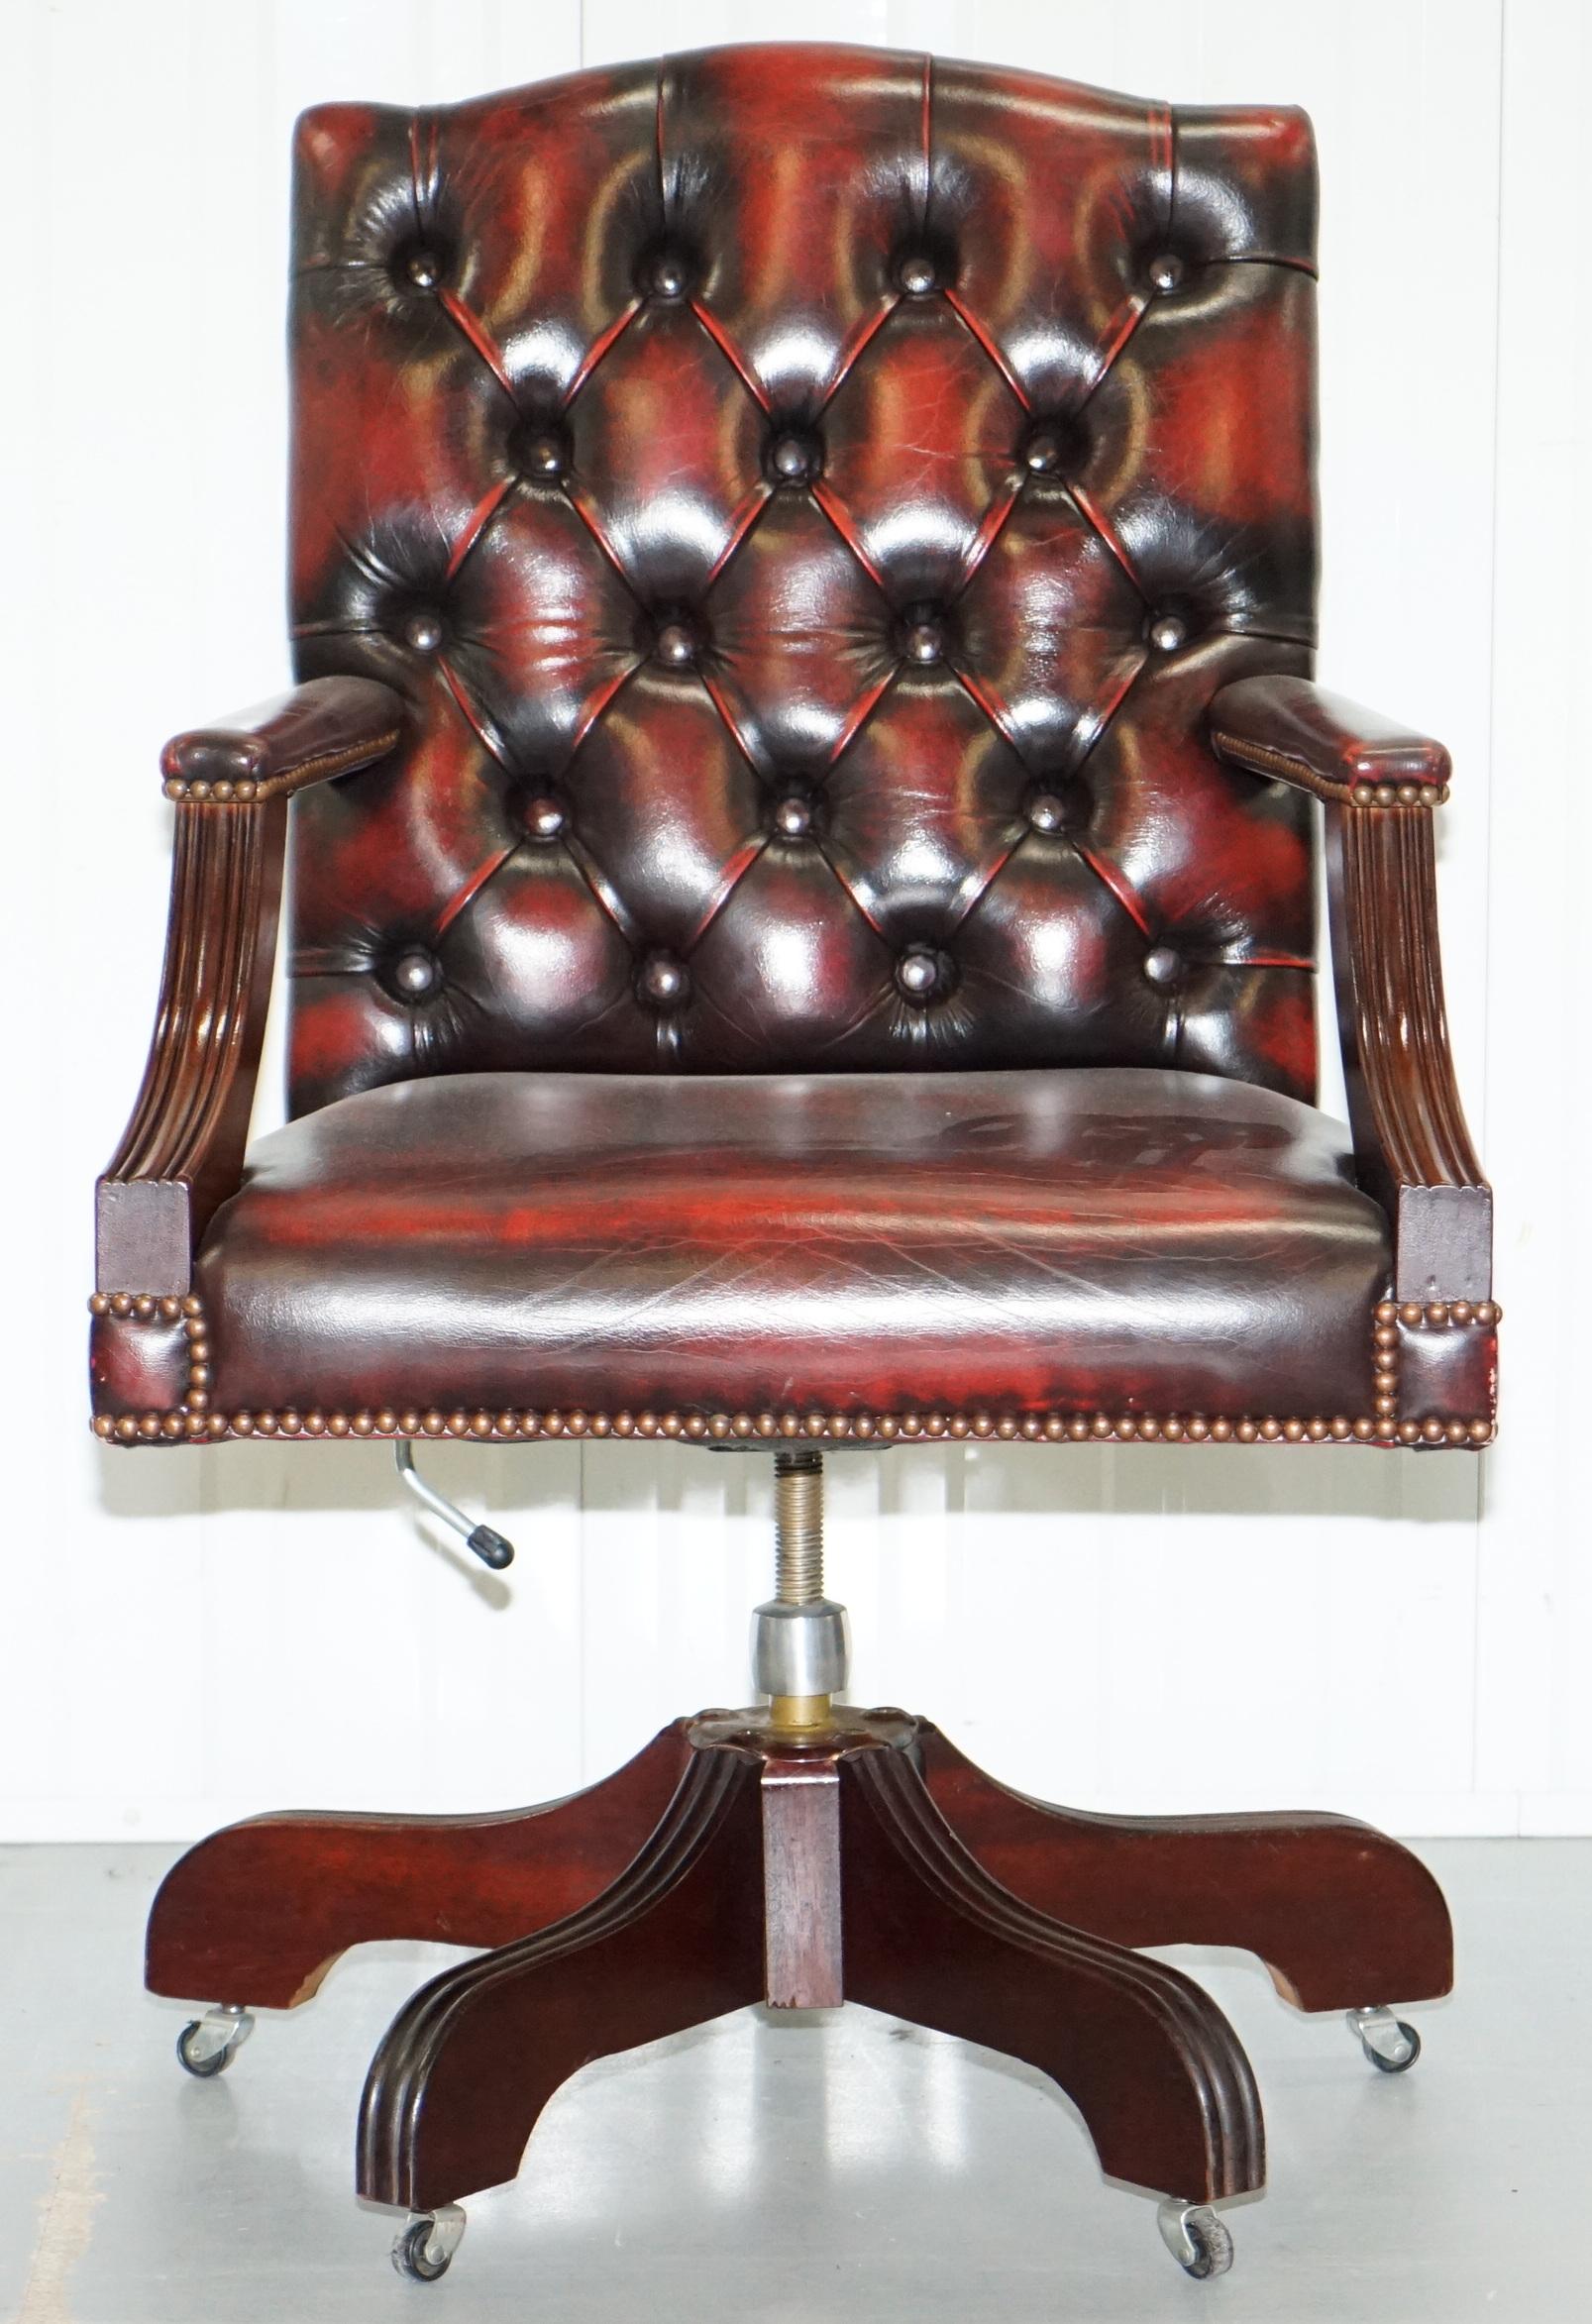 We are delighted to offer for sale this lovely vintage Bevan Funnel Chesterfield directors oxblood leather captains office chair

All Bevan Funnell pieces are handmade in England to order, nothing is shelf bought and all materials are sourced